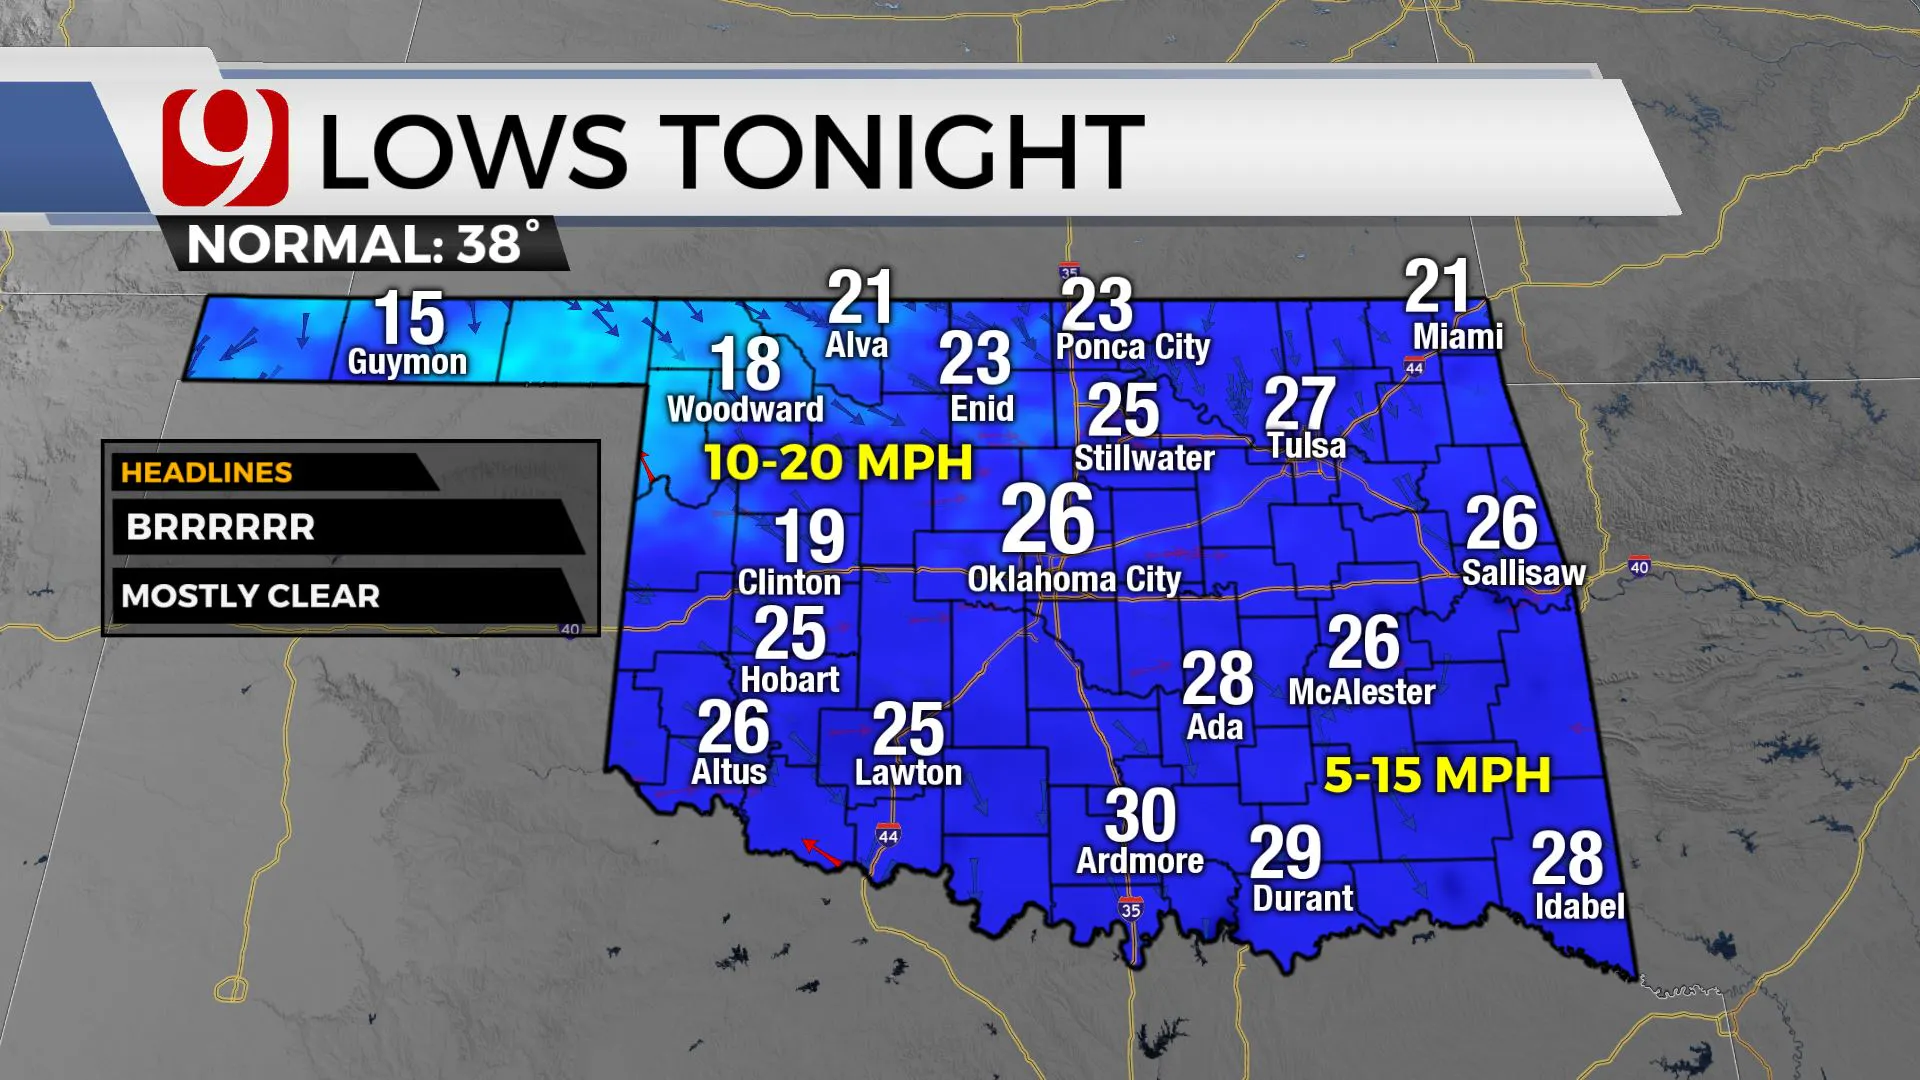 Lows temps for Tuesday night.